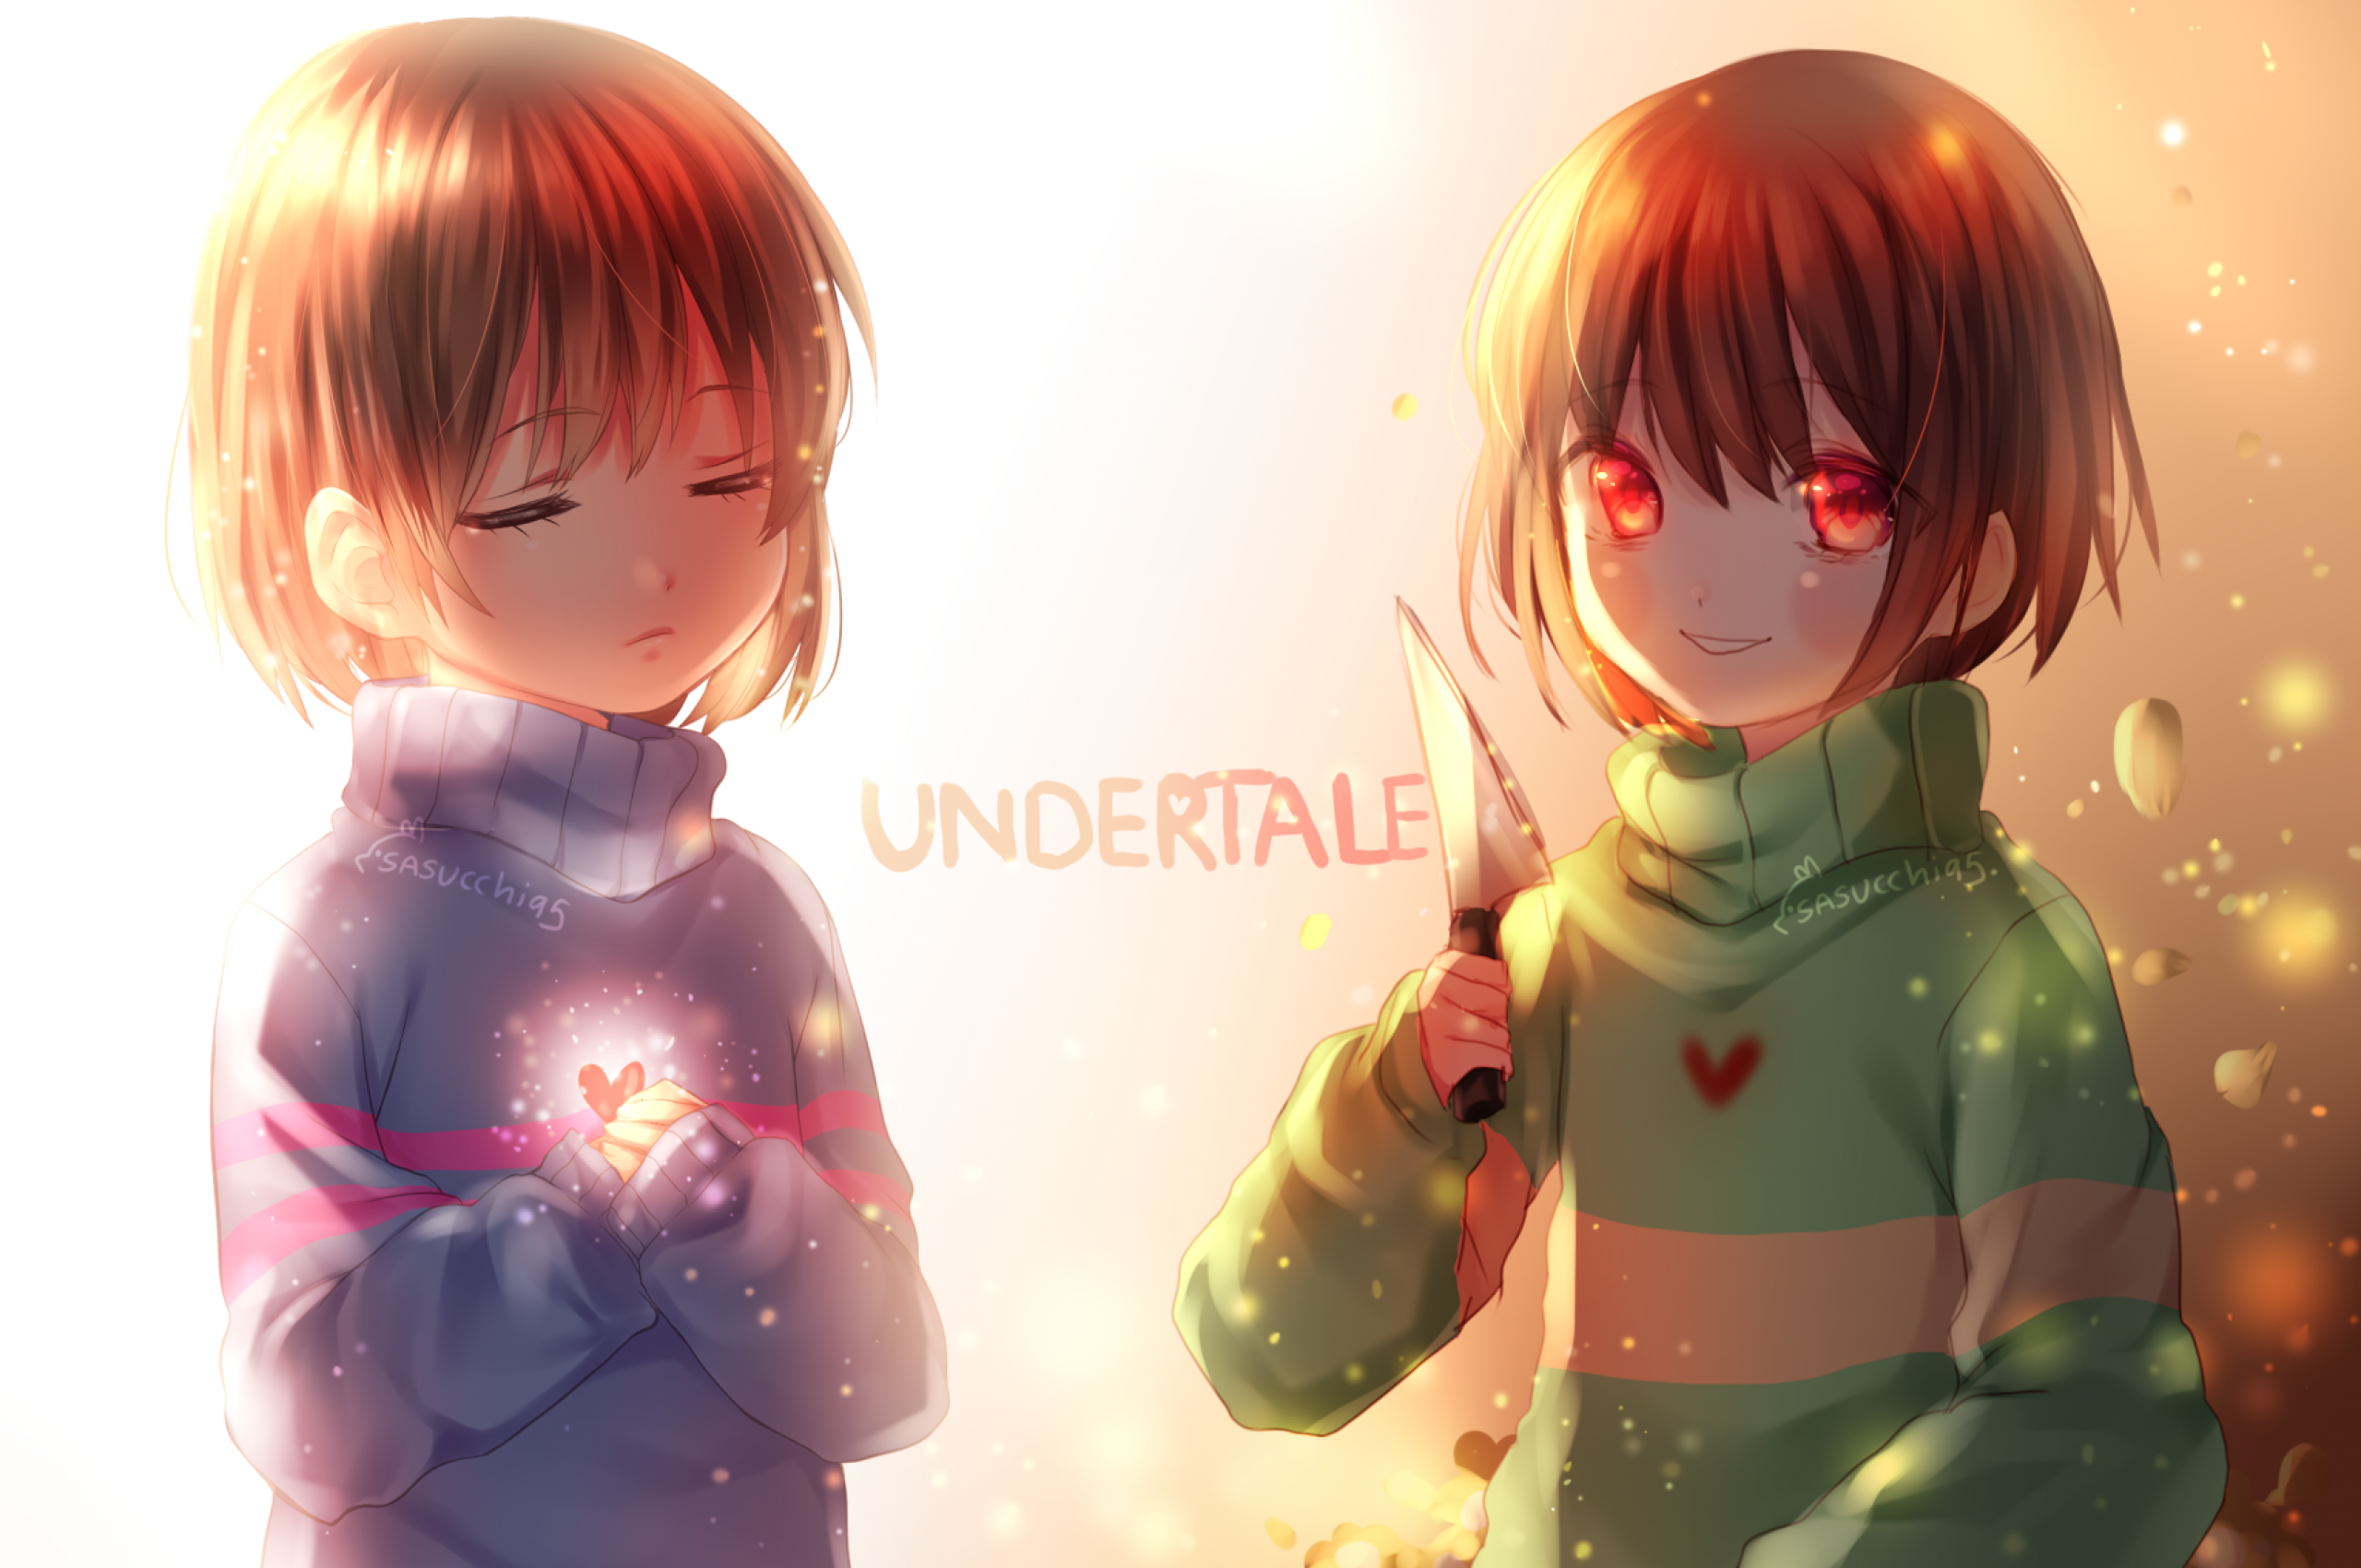 Download 2560x1700 Undertale, Frisk, Chara, Anime Style Wallpaper for Chromebook Pixel